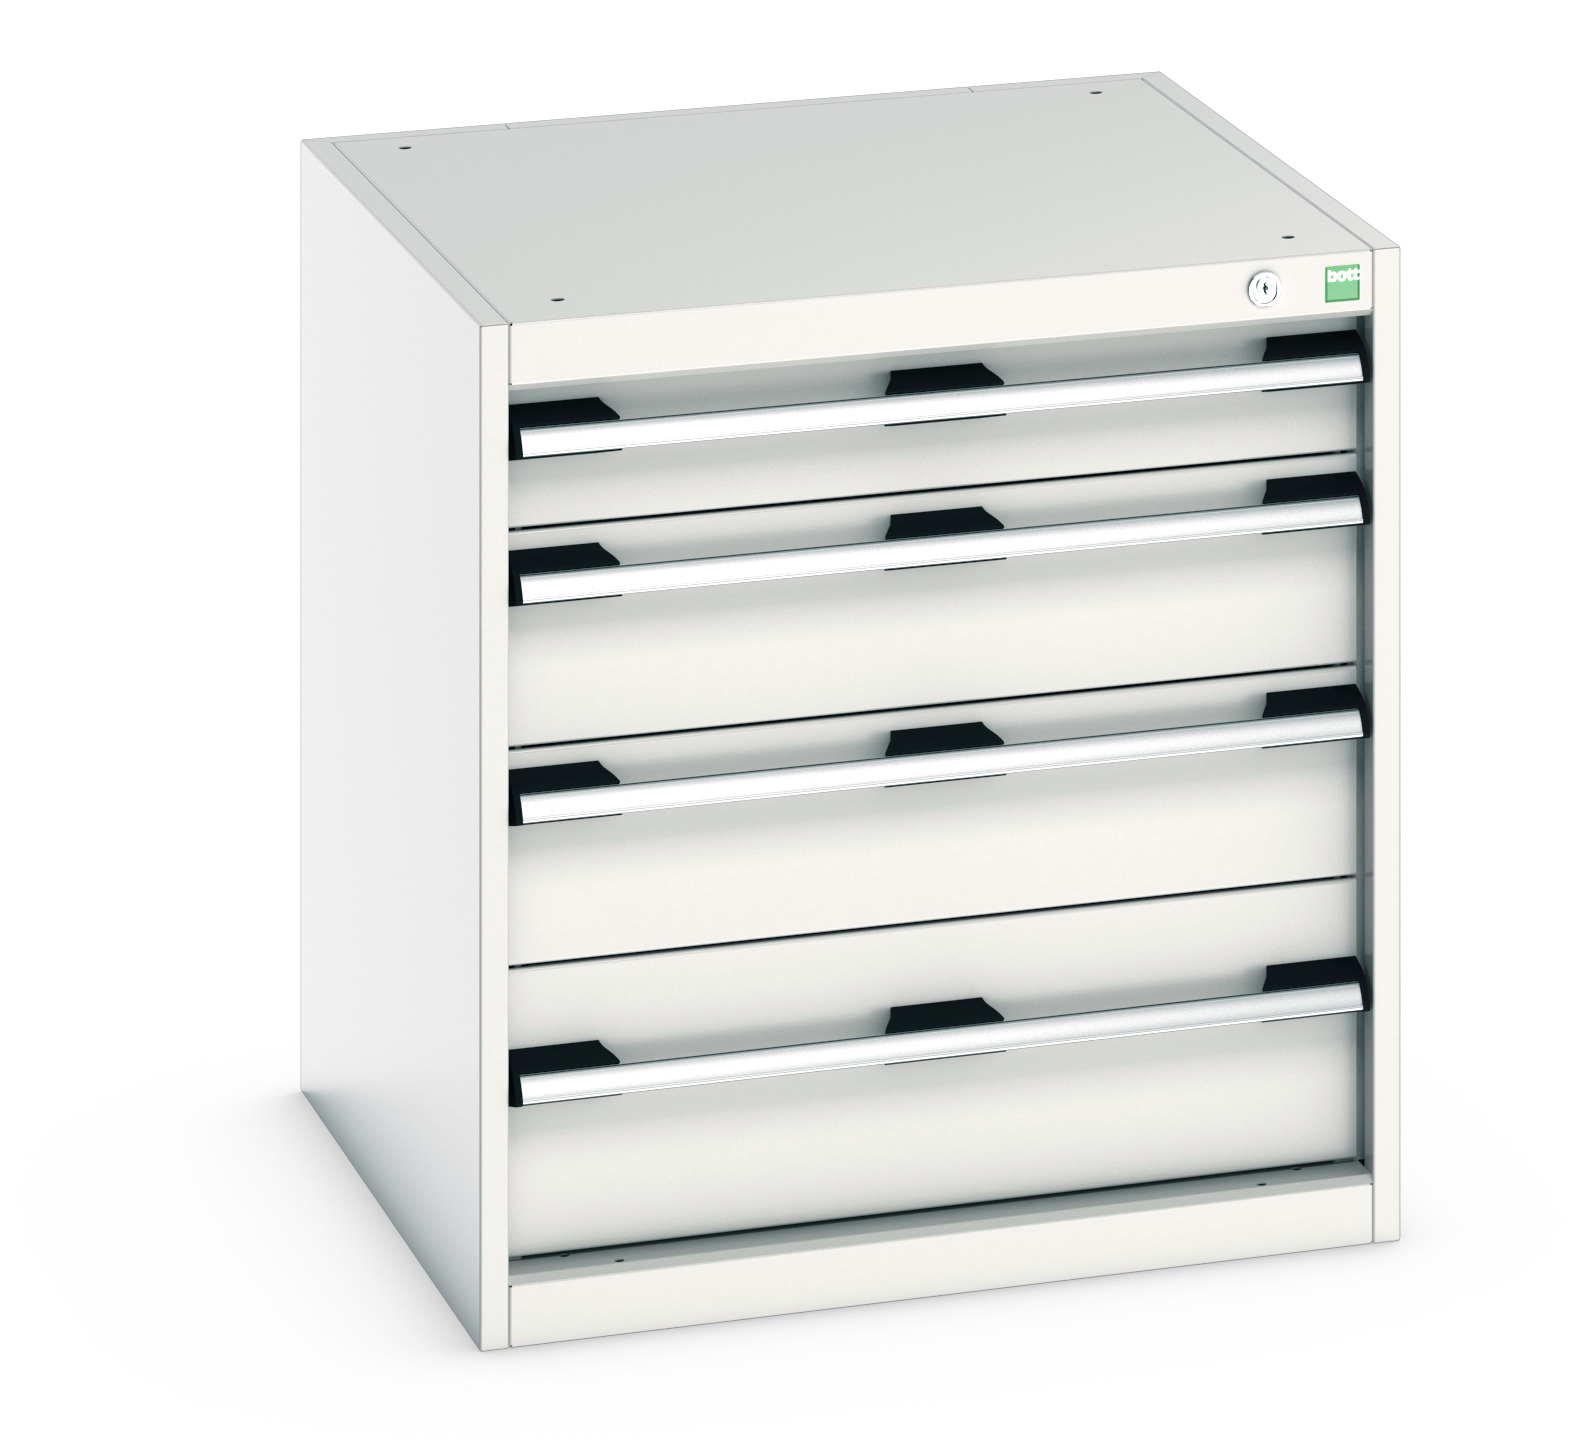 Bott Cubio Drawer Cabinet With 4 Drawers - 40019025.16V